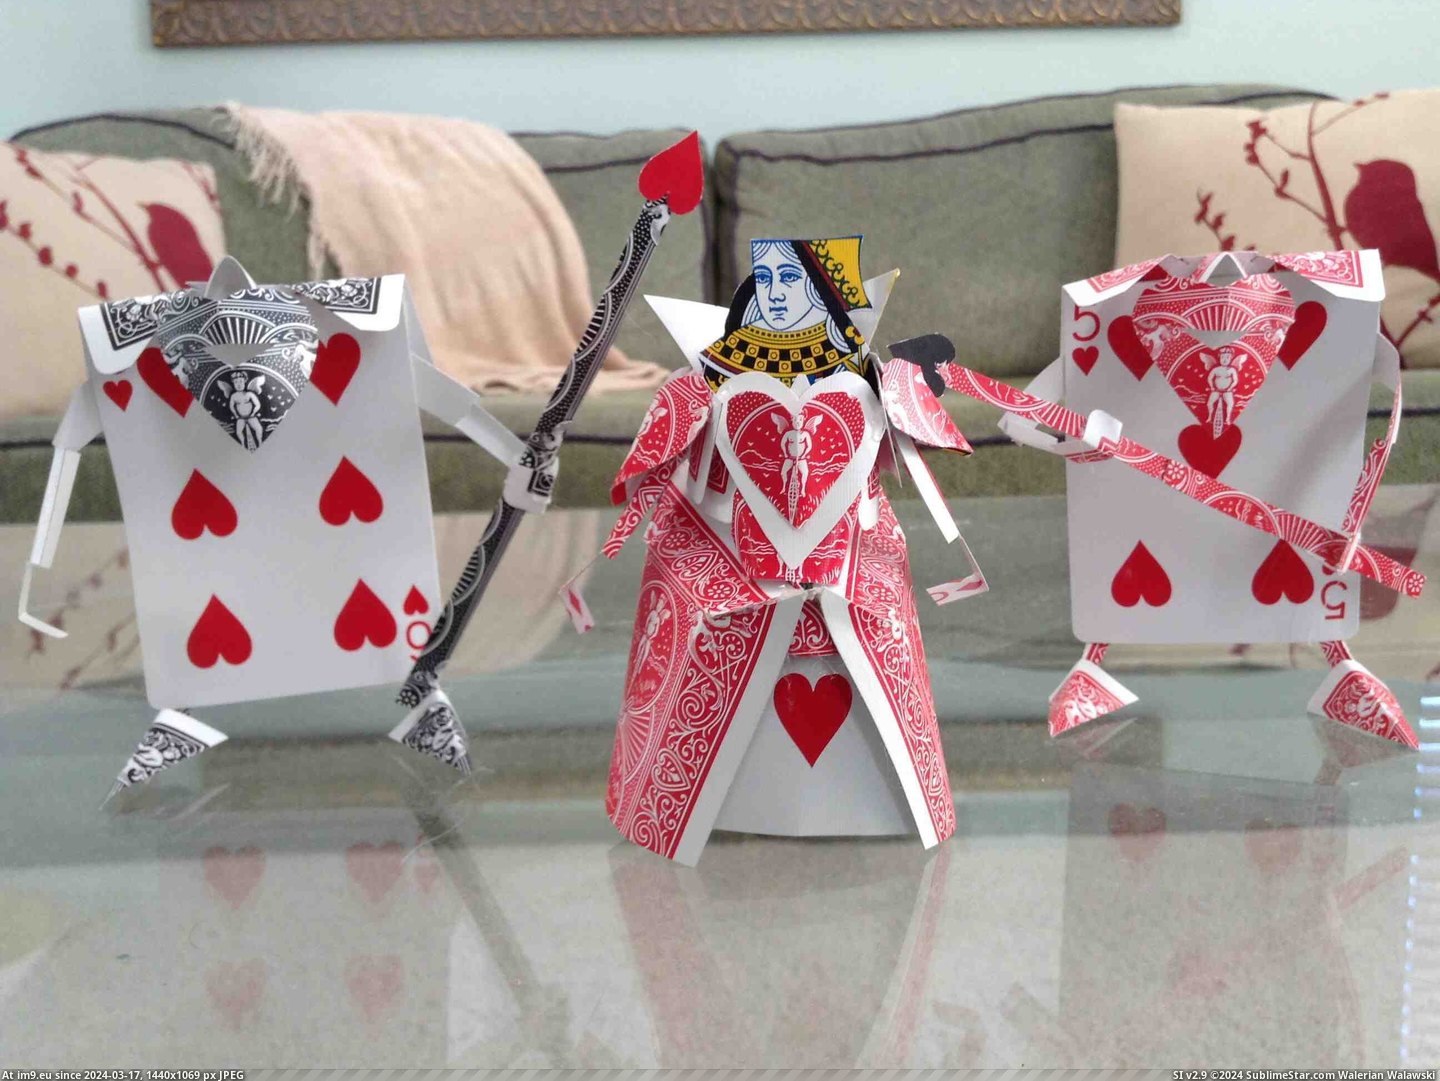 #Red #Heart #Queen #Army #Wonderland #Card #Alice #Cards [Pics] Red Card Heart Army & Queen of Heart (Alice in Wonderland) I made out of cards Pic. (Obraz z album My r/PICS favs))